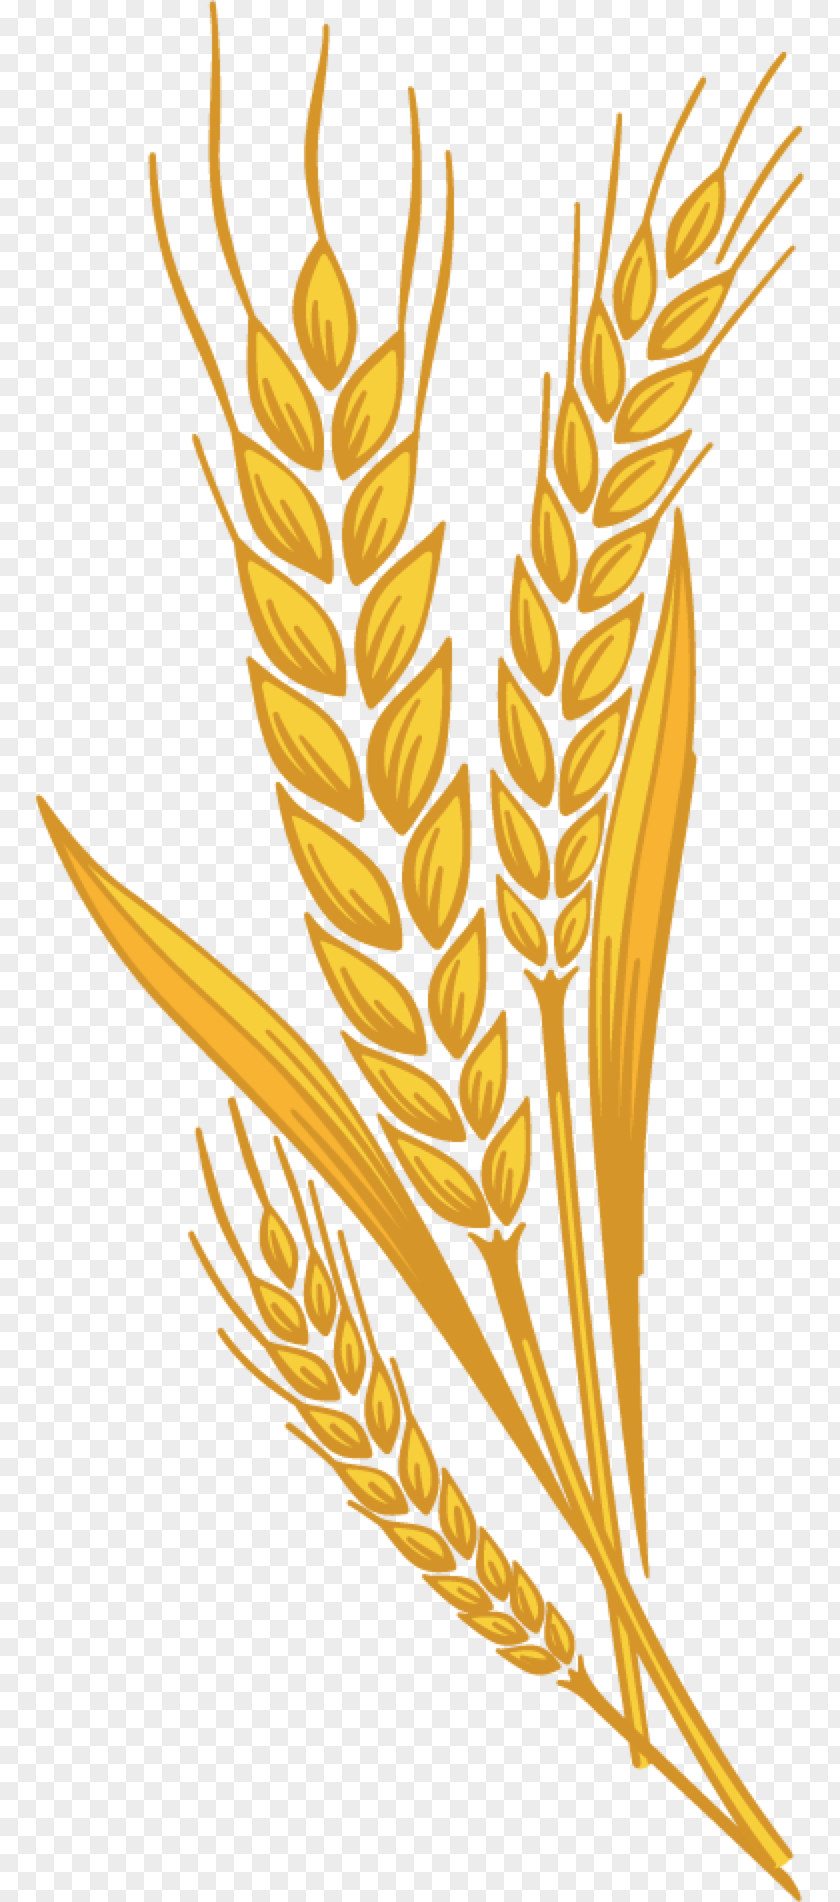 Wheat Muffin Emmer Common Cereal Germ Clip Art PNG